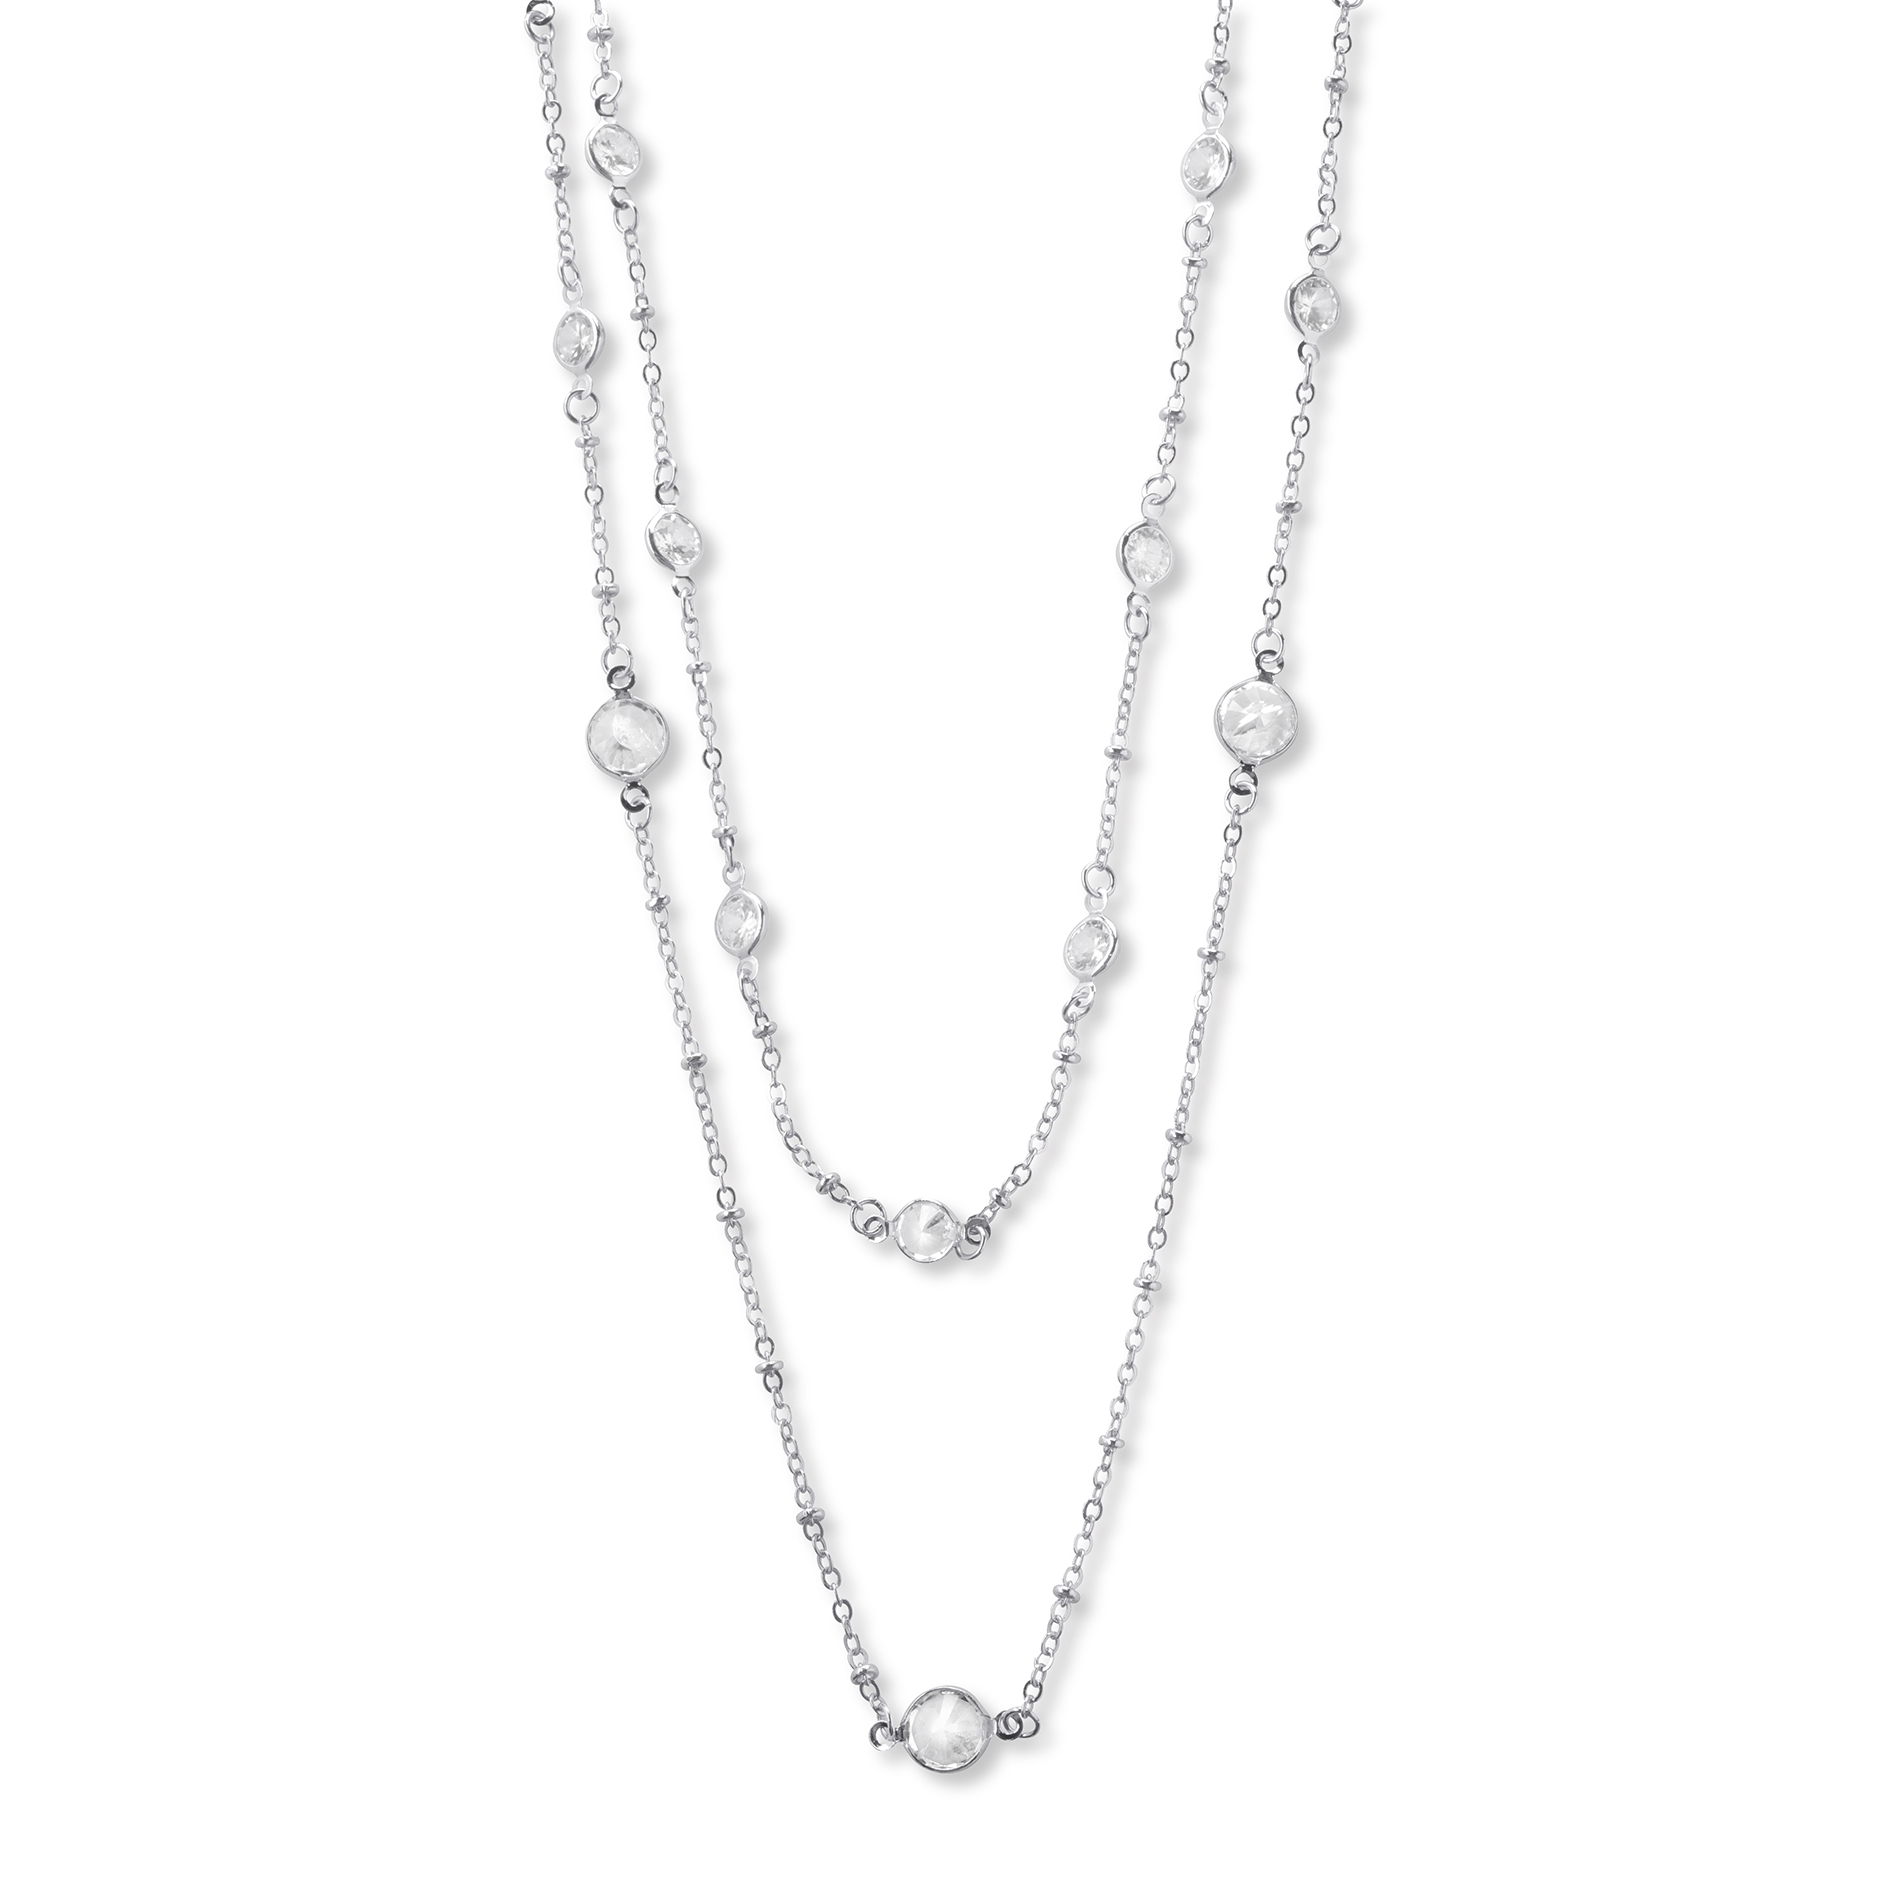 Jaclyn Smith Embellished 2-Row Necklace